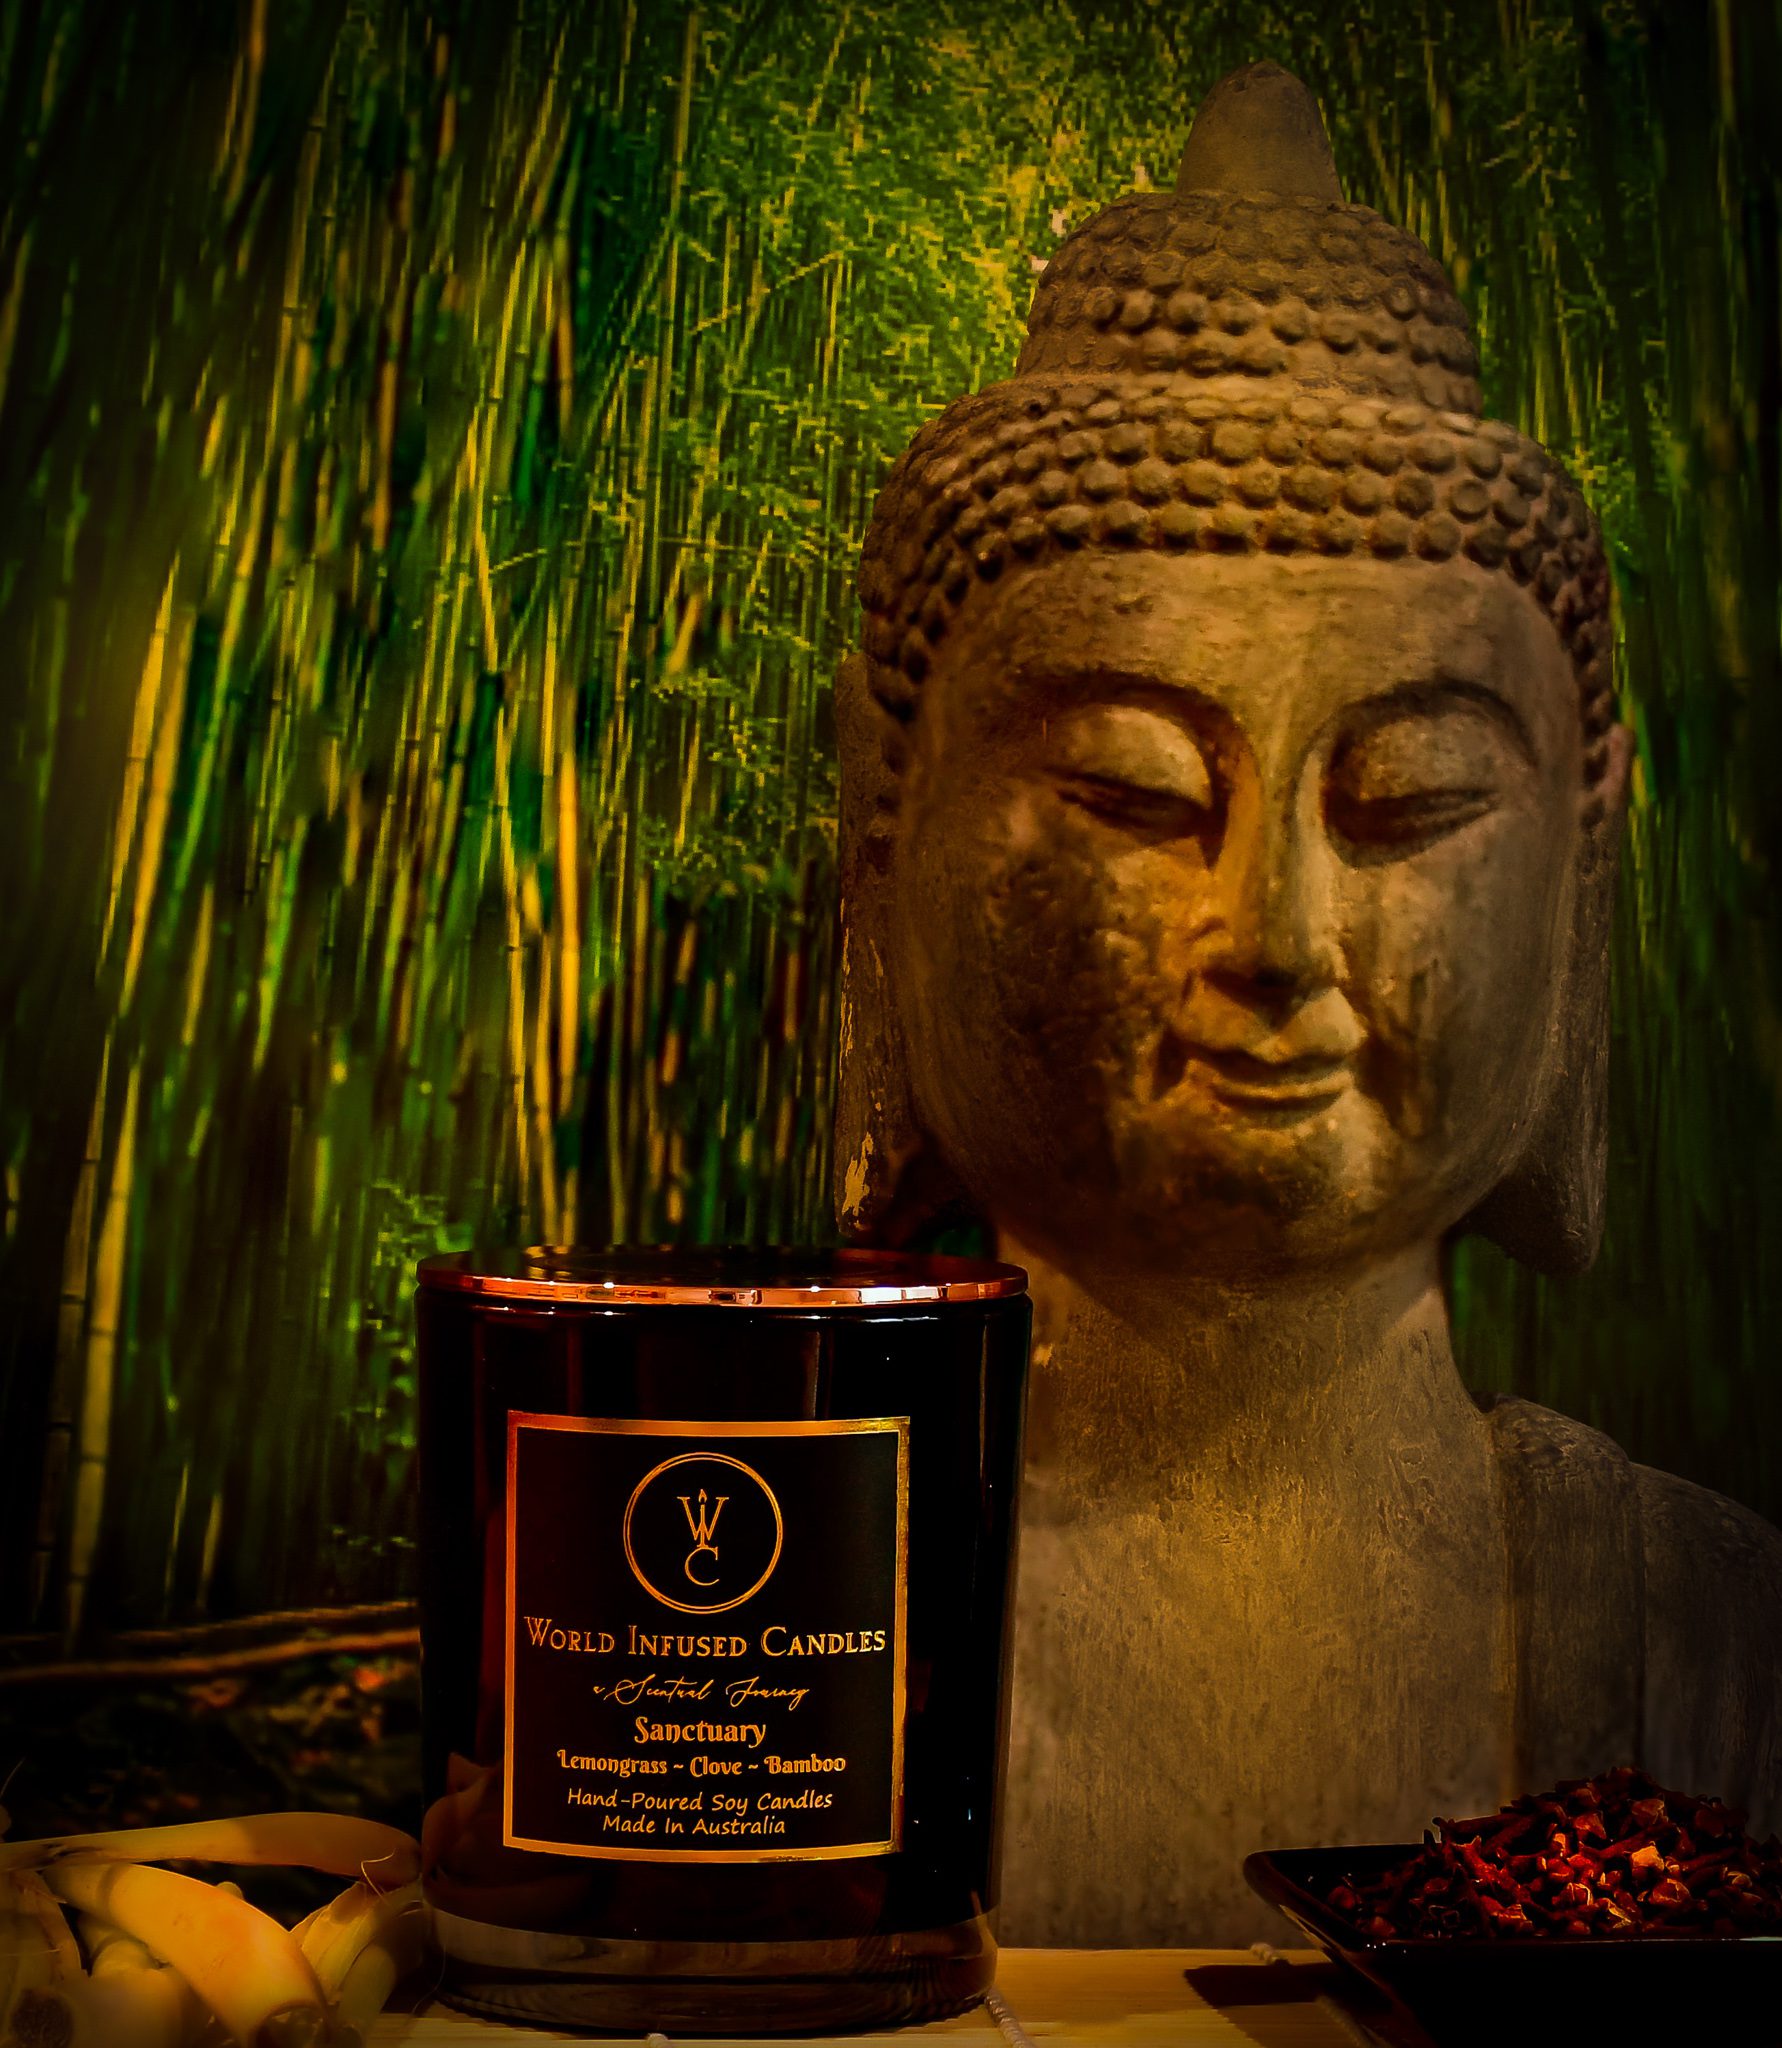 Sanctuary Lemongrass and Bamboo Candle is combined with Clove buddha statue in the background with bamboo